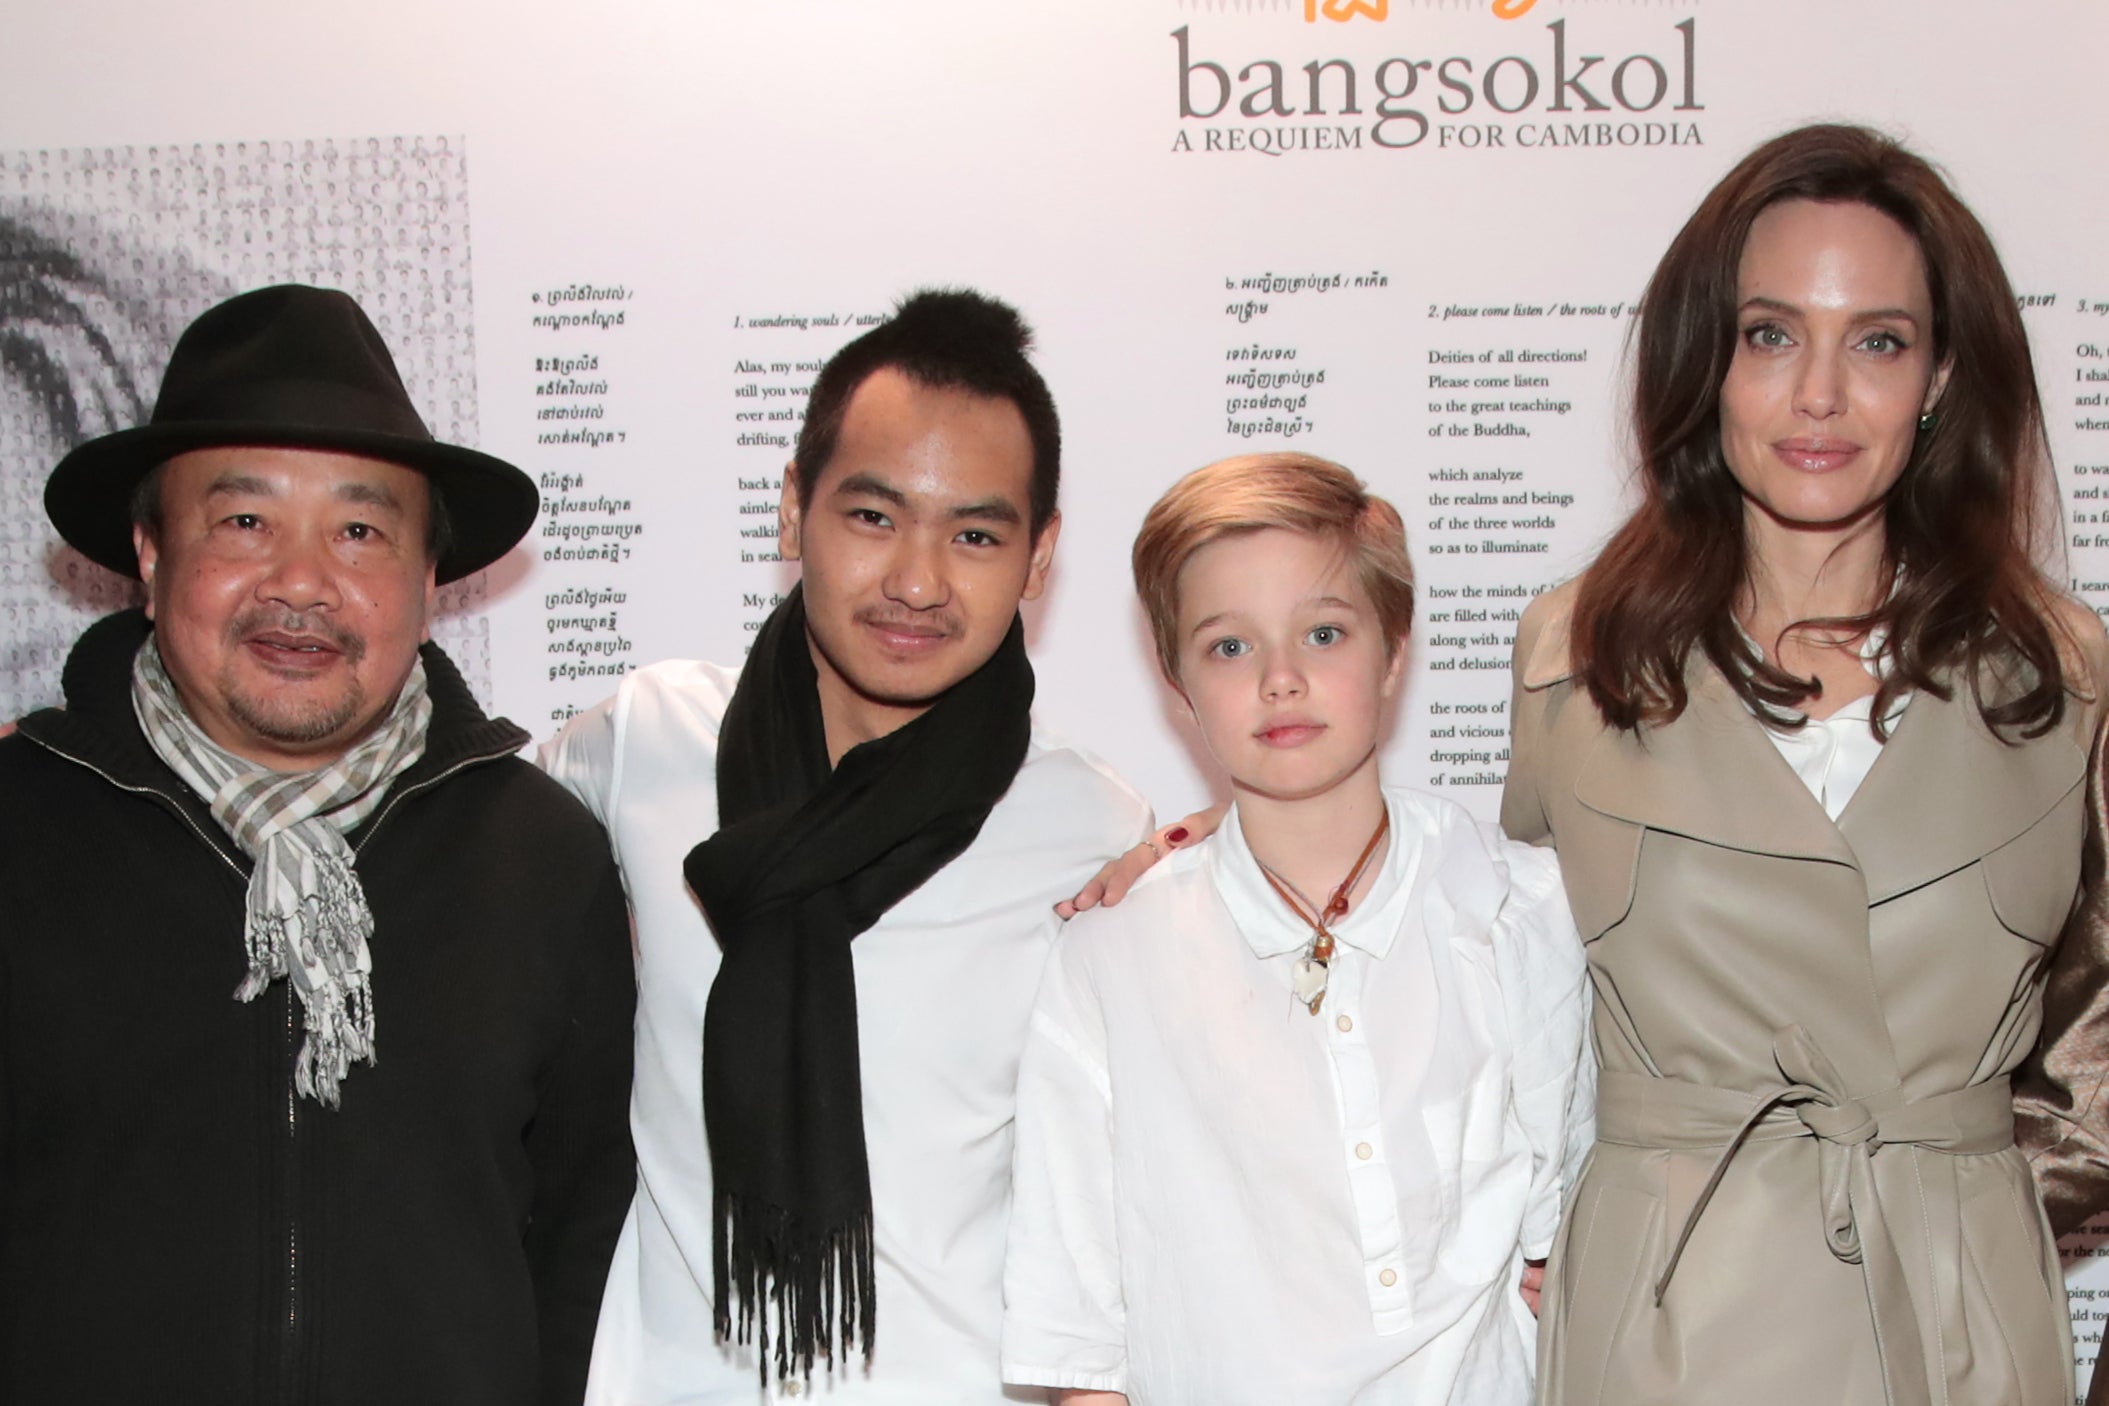 Jolie at an event in 2017 for ‘First They Killed Her Father’ with the producer Rithy Panh and her children Maddox and Shiloh